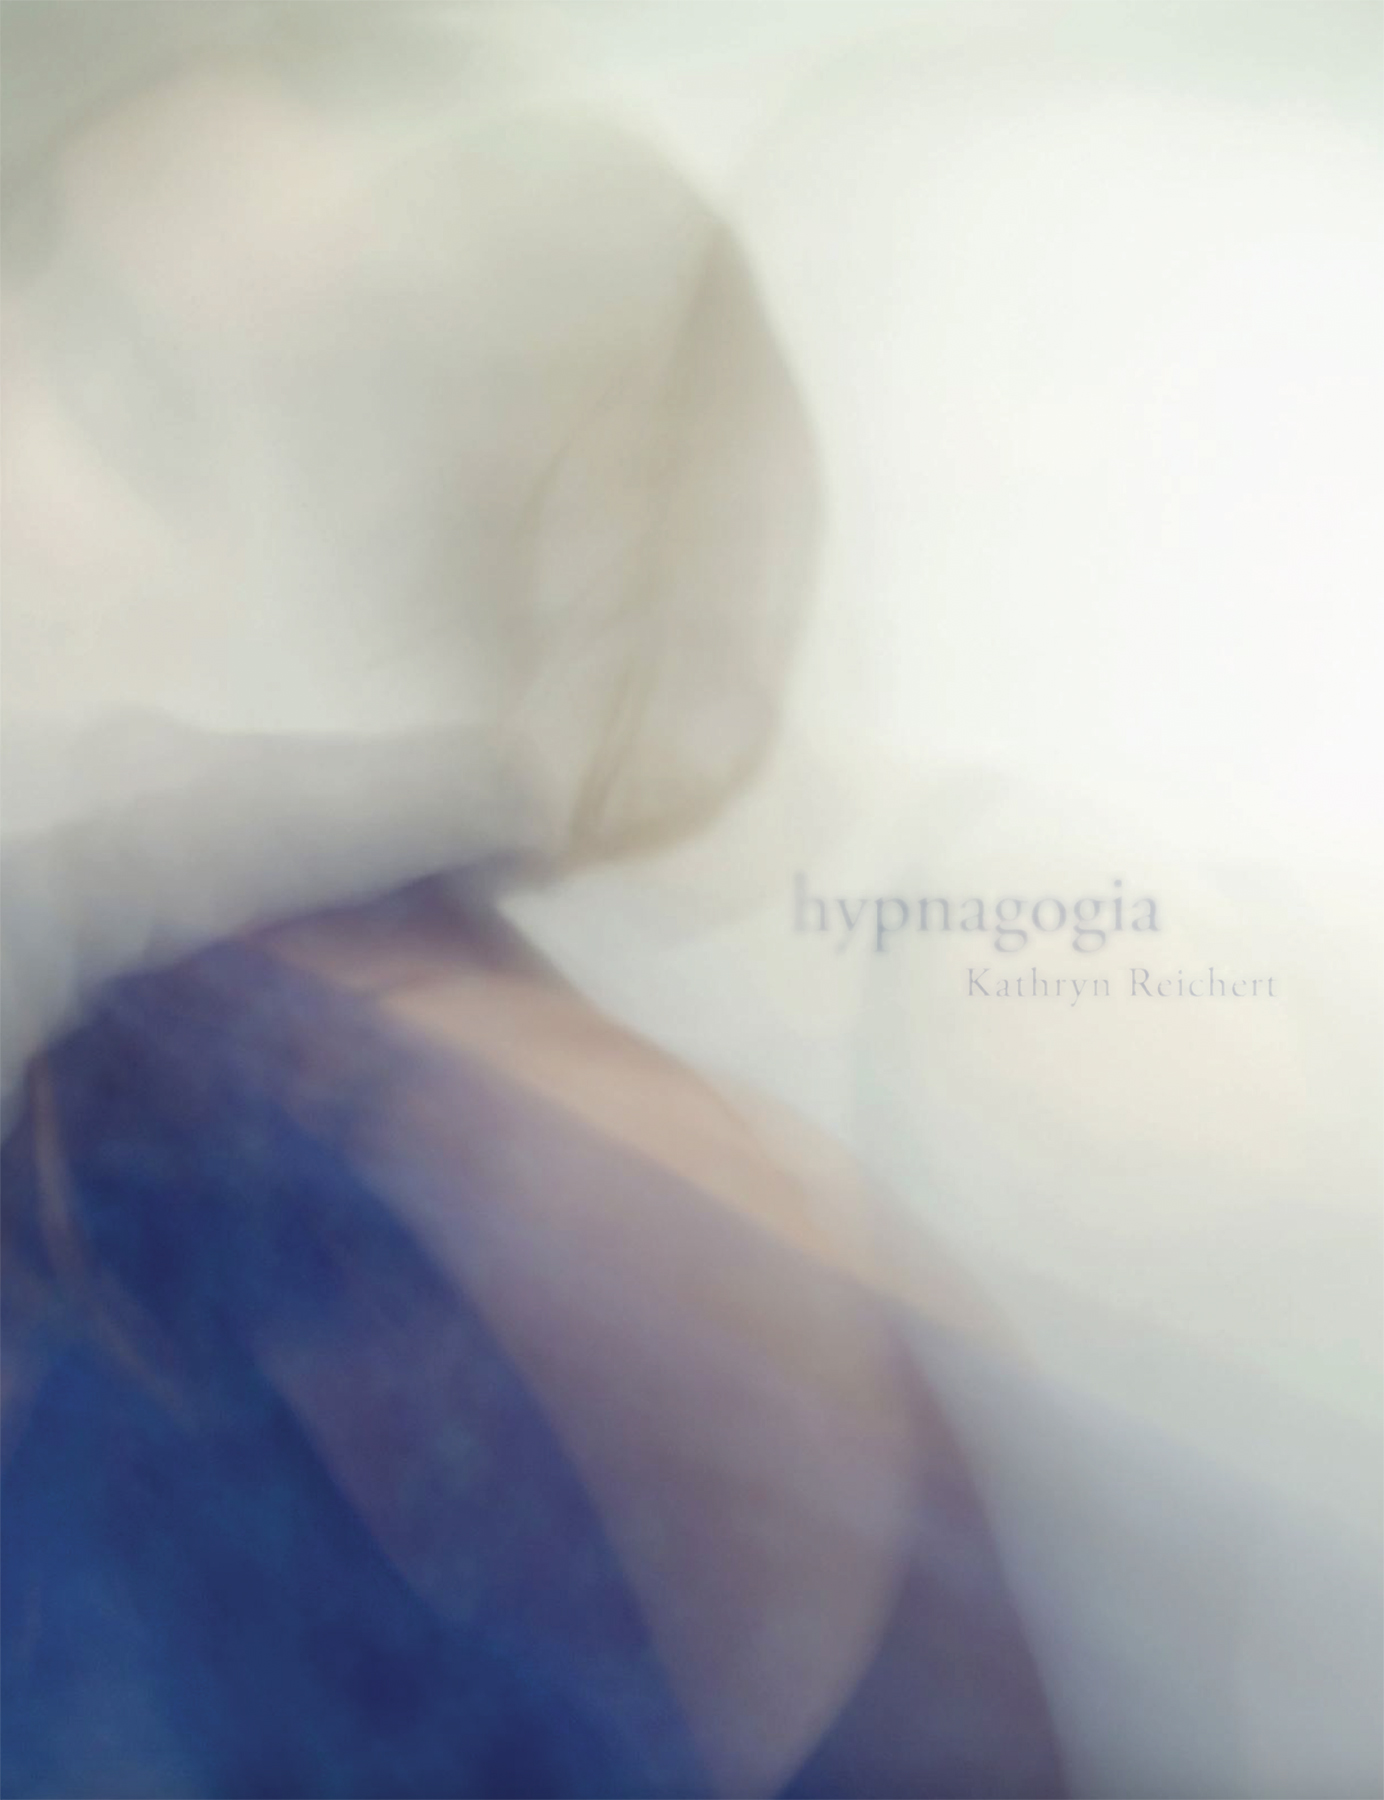 Cover of Hypnagogia, self published art book by Kathryn Reichert